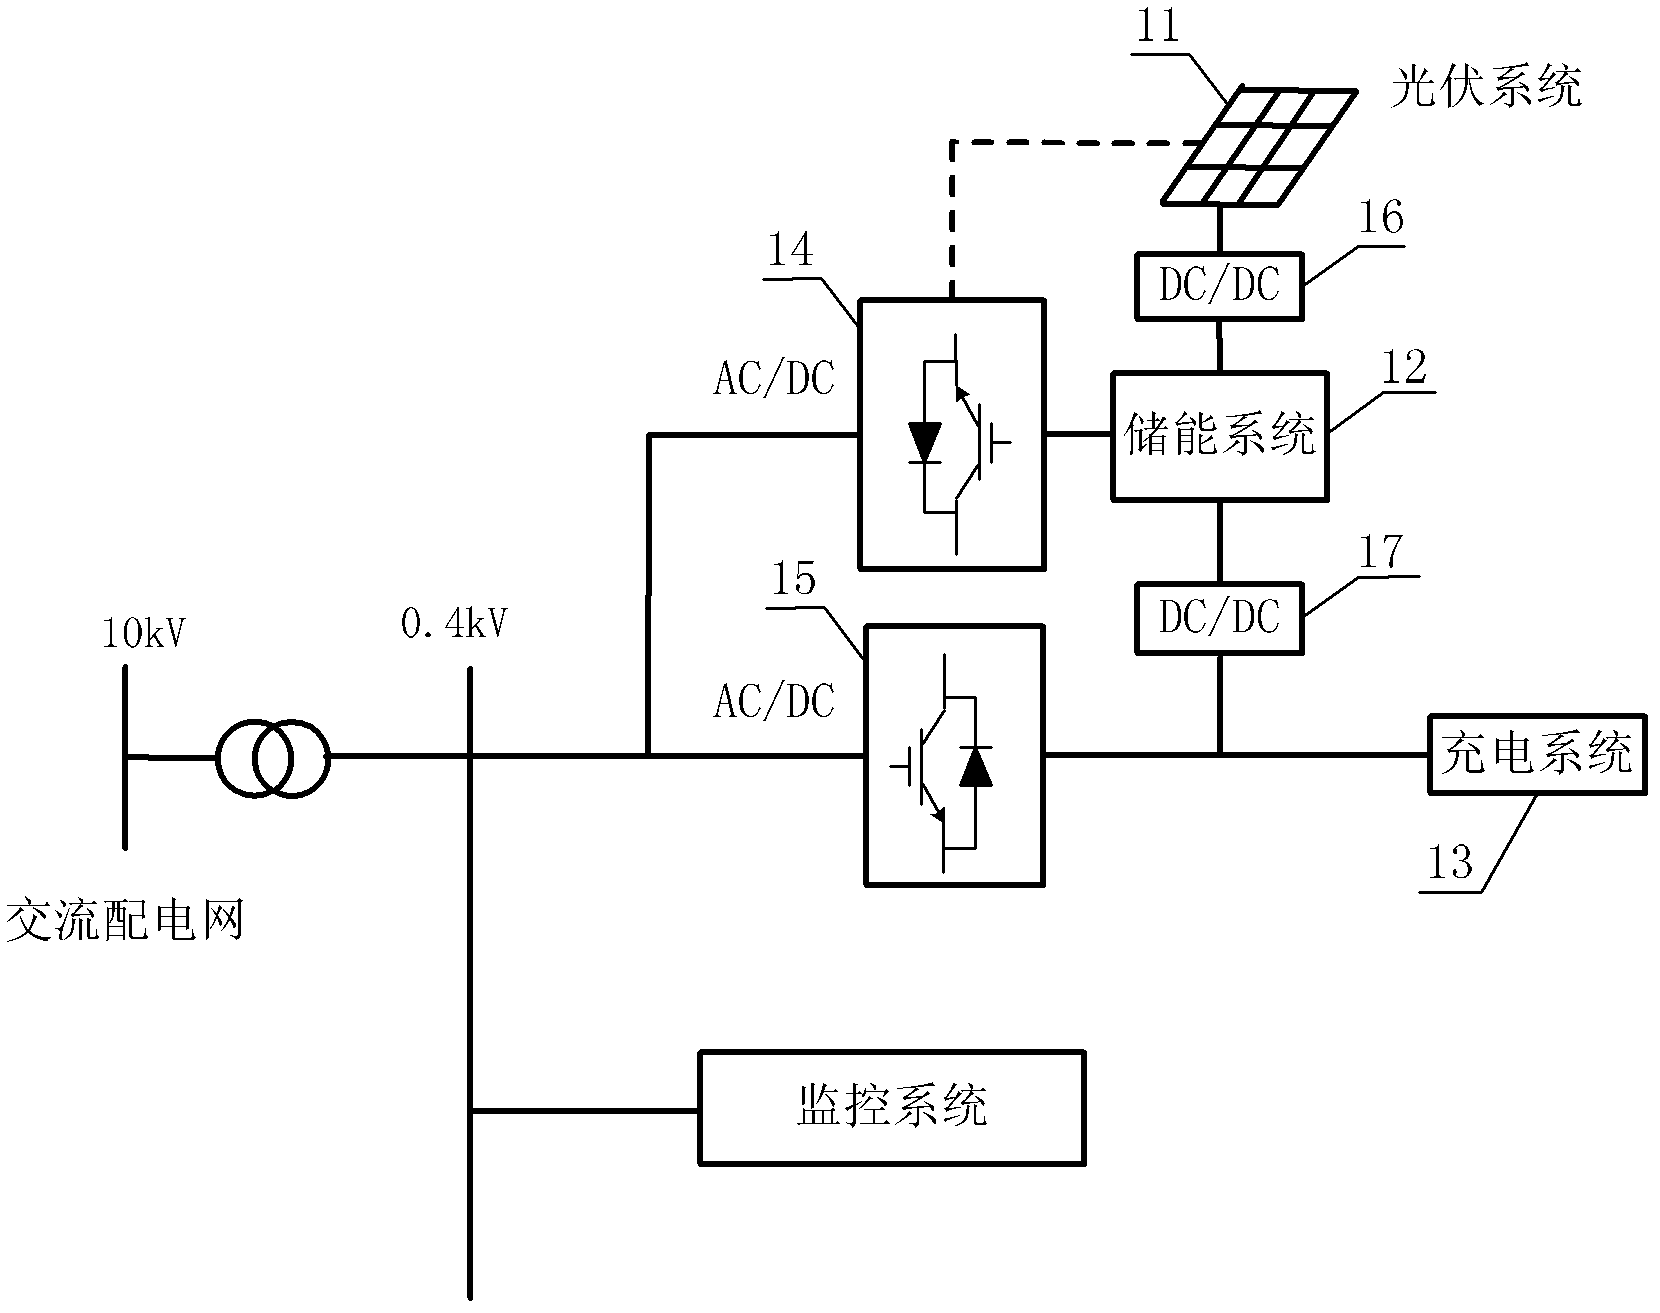 Photovoltaic energy storage electric automobile charging station system and method for switching state of energy storage system